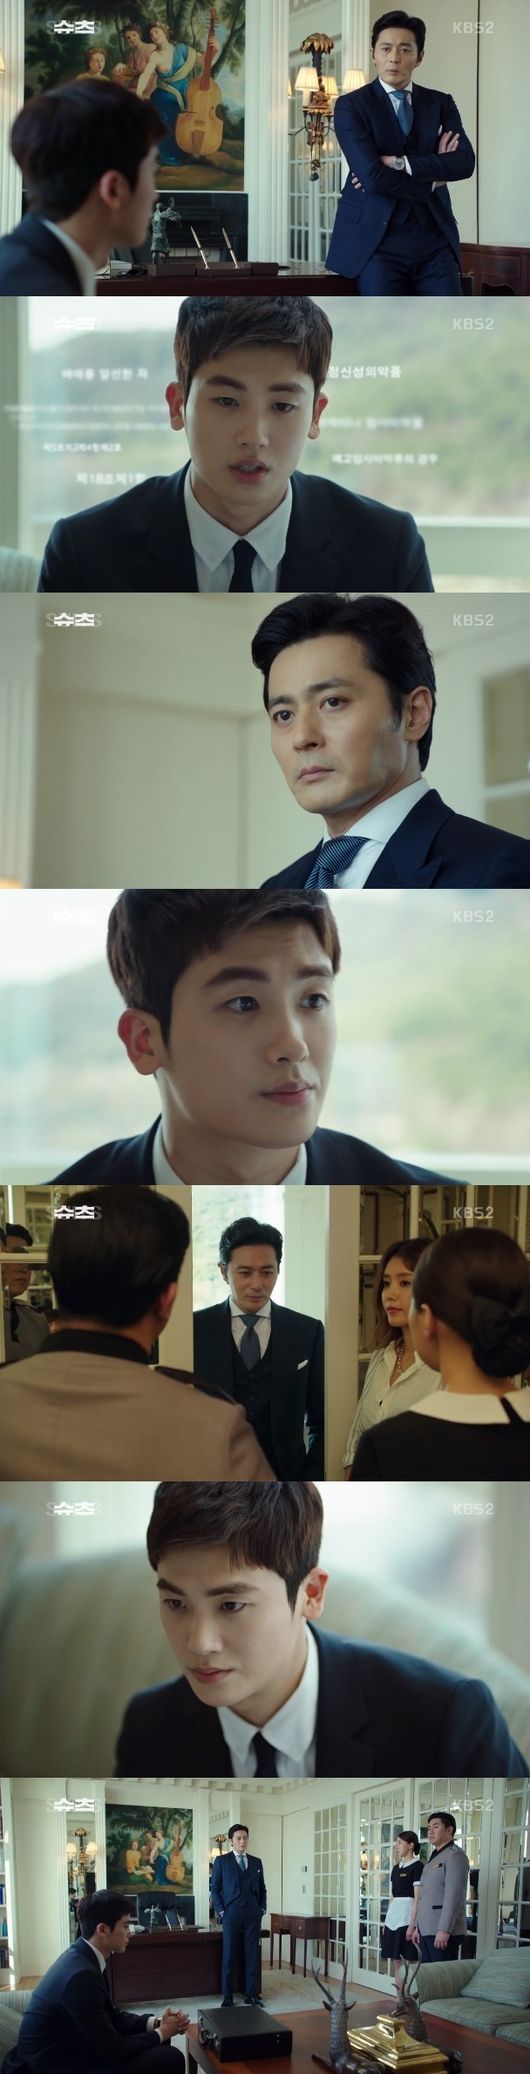 Suits Jang Dong-gun was selected as a new lawyer against the genius of Park Hyung-sik, but he was fired to go home in Haru Bay.In the KBS2 new drama Suits, which was first broadcast on the 25th, ace lawyer Miniforce Seok (Jang Dong-gun) of law firm Gang & Ham passed Memory genius Ko Yeon-woo (Park Hyung-sik) at an interview with a new lawyer, but he was shown fire as soon as he got to work. I met Park Joon-pyo (Lee Kyung-min), a chaebol, and boasted of his genius memory and knowledge.Park Joon-pyo put a check on Ko Yeon-woos memory to test, and in the process, Ko Yeon-woo, who was upset by sarcasm, touched his pride by hitting Park Joon-pyo.An angry Park Joon-pyo planned to get revenge, and made a drug bag delivered by Ko Yeon-woo through the iron.When Ko Yeon-woo was in a difficult situation, he headed to the hotel to deliver the bag, but there were Decectives lurking.Everything was a scheme of Park Joon-pyo, and Ko Yeon-woo started to escape from Detectives. At the same time, a new lawyer interview with law firm Gang & Ham was conducted at the hotel, and Miniforce was evaluating interviewees.Ko found an interview room while running away, deceived himself as a pervert, and entered the room with the Miniforce seat.Miniforce asked a variety of questions as soon as he saw the rainbow, and he answered the trick without clogging. At that moment, the bag that Ko Yeon-woo was holding was opened and new drugs were poured.Detectives came to the interview room at this time, and Miniforce watched the actions of Ko Yeon-woo in cooperation with the police work.As Detective continued to cast doubt, Ko Yeon-woo defended himself, referring to the Police Officers Job Enforcement Act.Here, Detectives even opened Ko Yeon-woos bag, but there were no drugs, and only legal books.A little while ago, when Miniforce was talking to Detectives through the door, Ko Yeon-woo took drugs from the bag and put legal books in it.Miniforce admired the genius and sense of Ko Yeon-woo, who had taken drugs in the bag in advance at the moment when the evidence was most important.